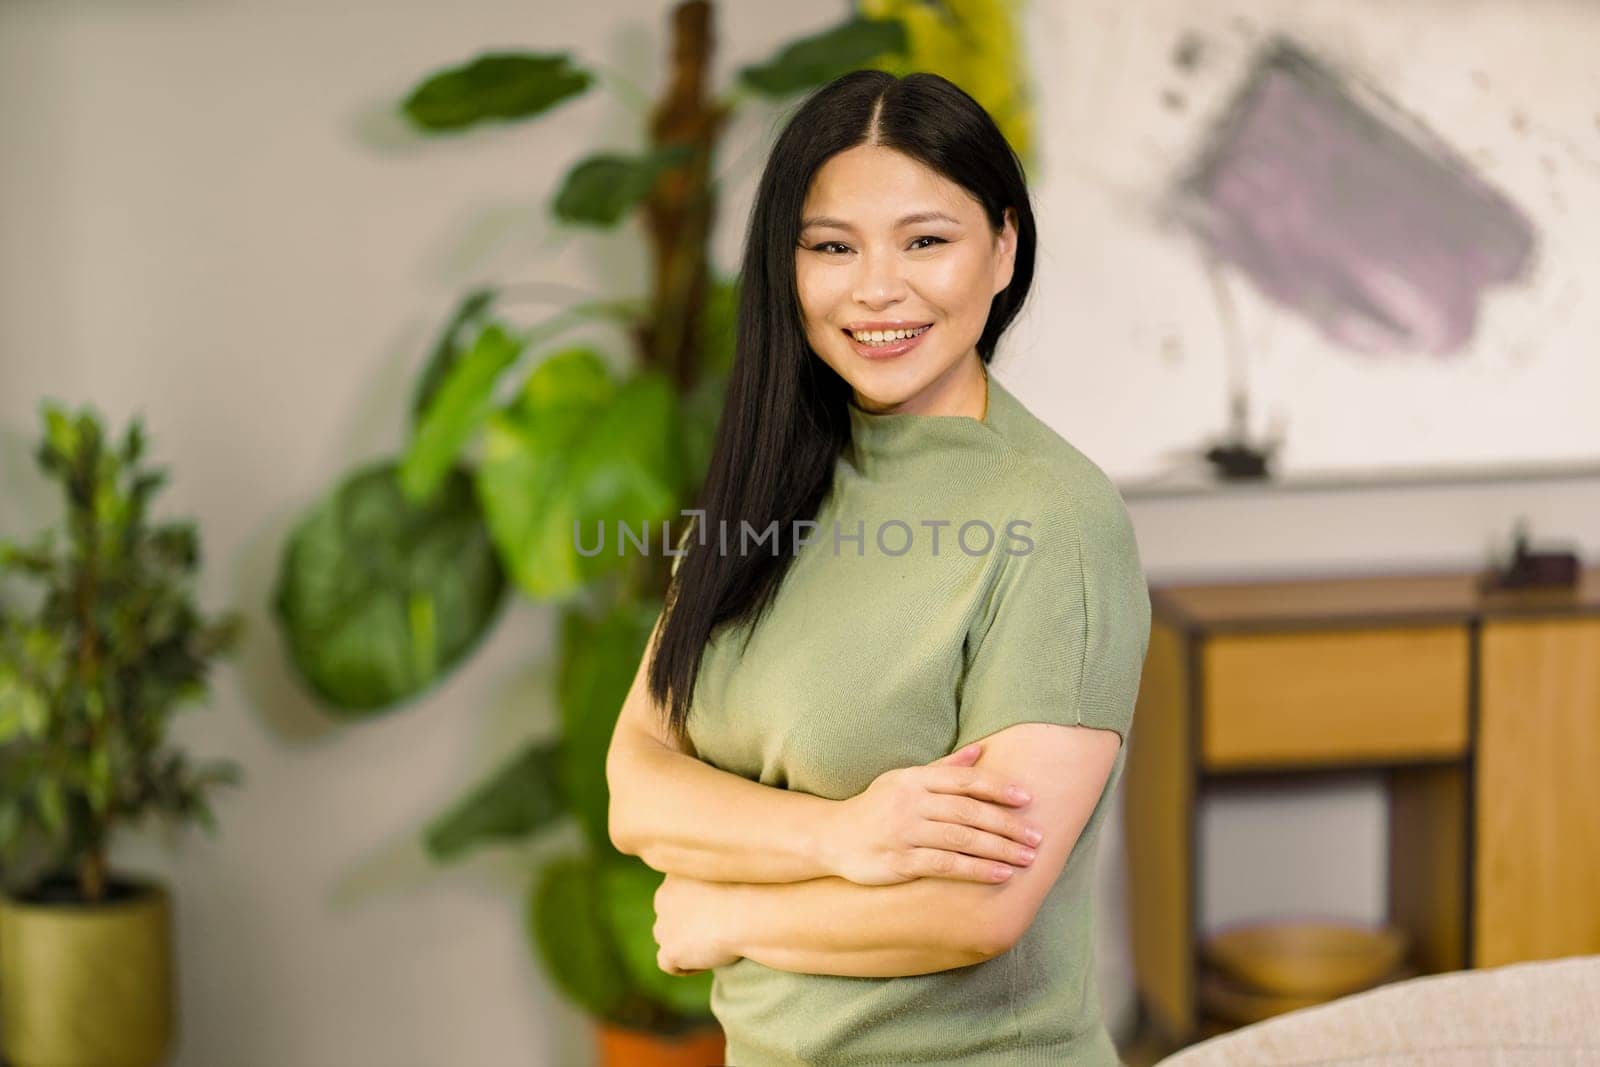 Middle-aged woman smiles with vibrant energy at home, embodying the concepts of healthy lifestyle and biohacking, promoting wellness and self-care. High quality photo